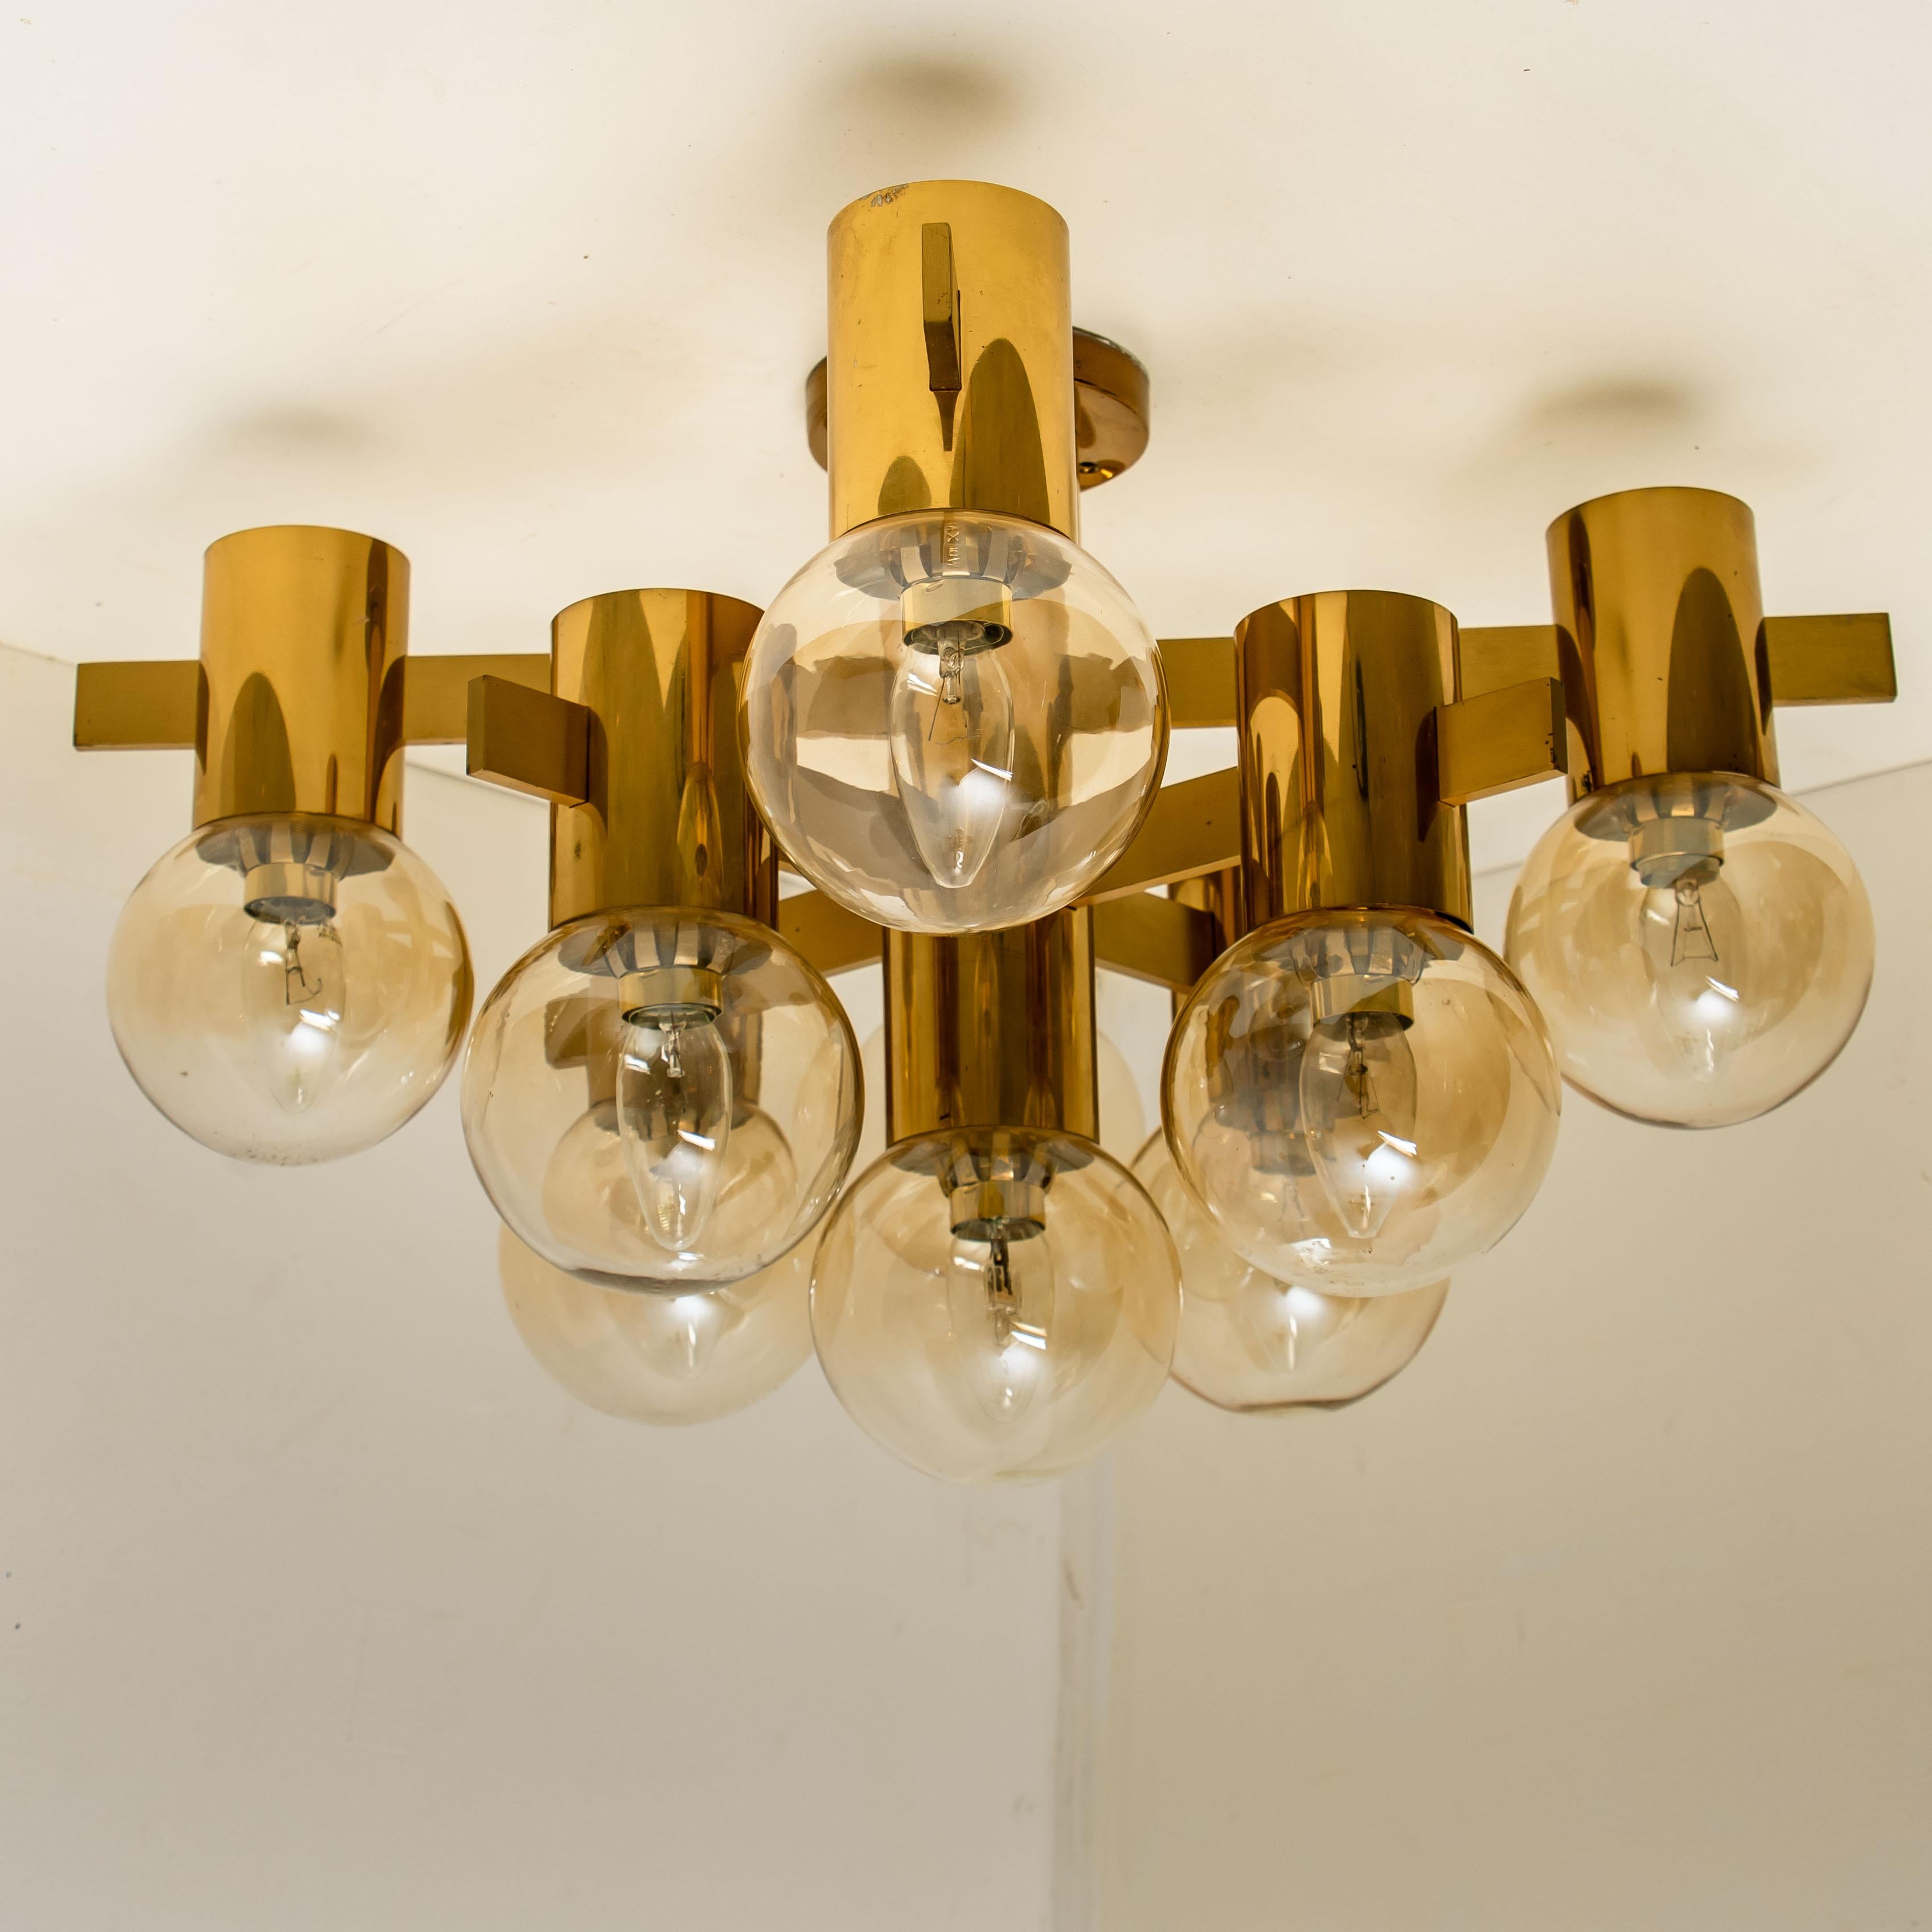 Set of Three Brass and Glass Light Fixtures in the Style of Jakobsson, 1960s For Sale 8